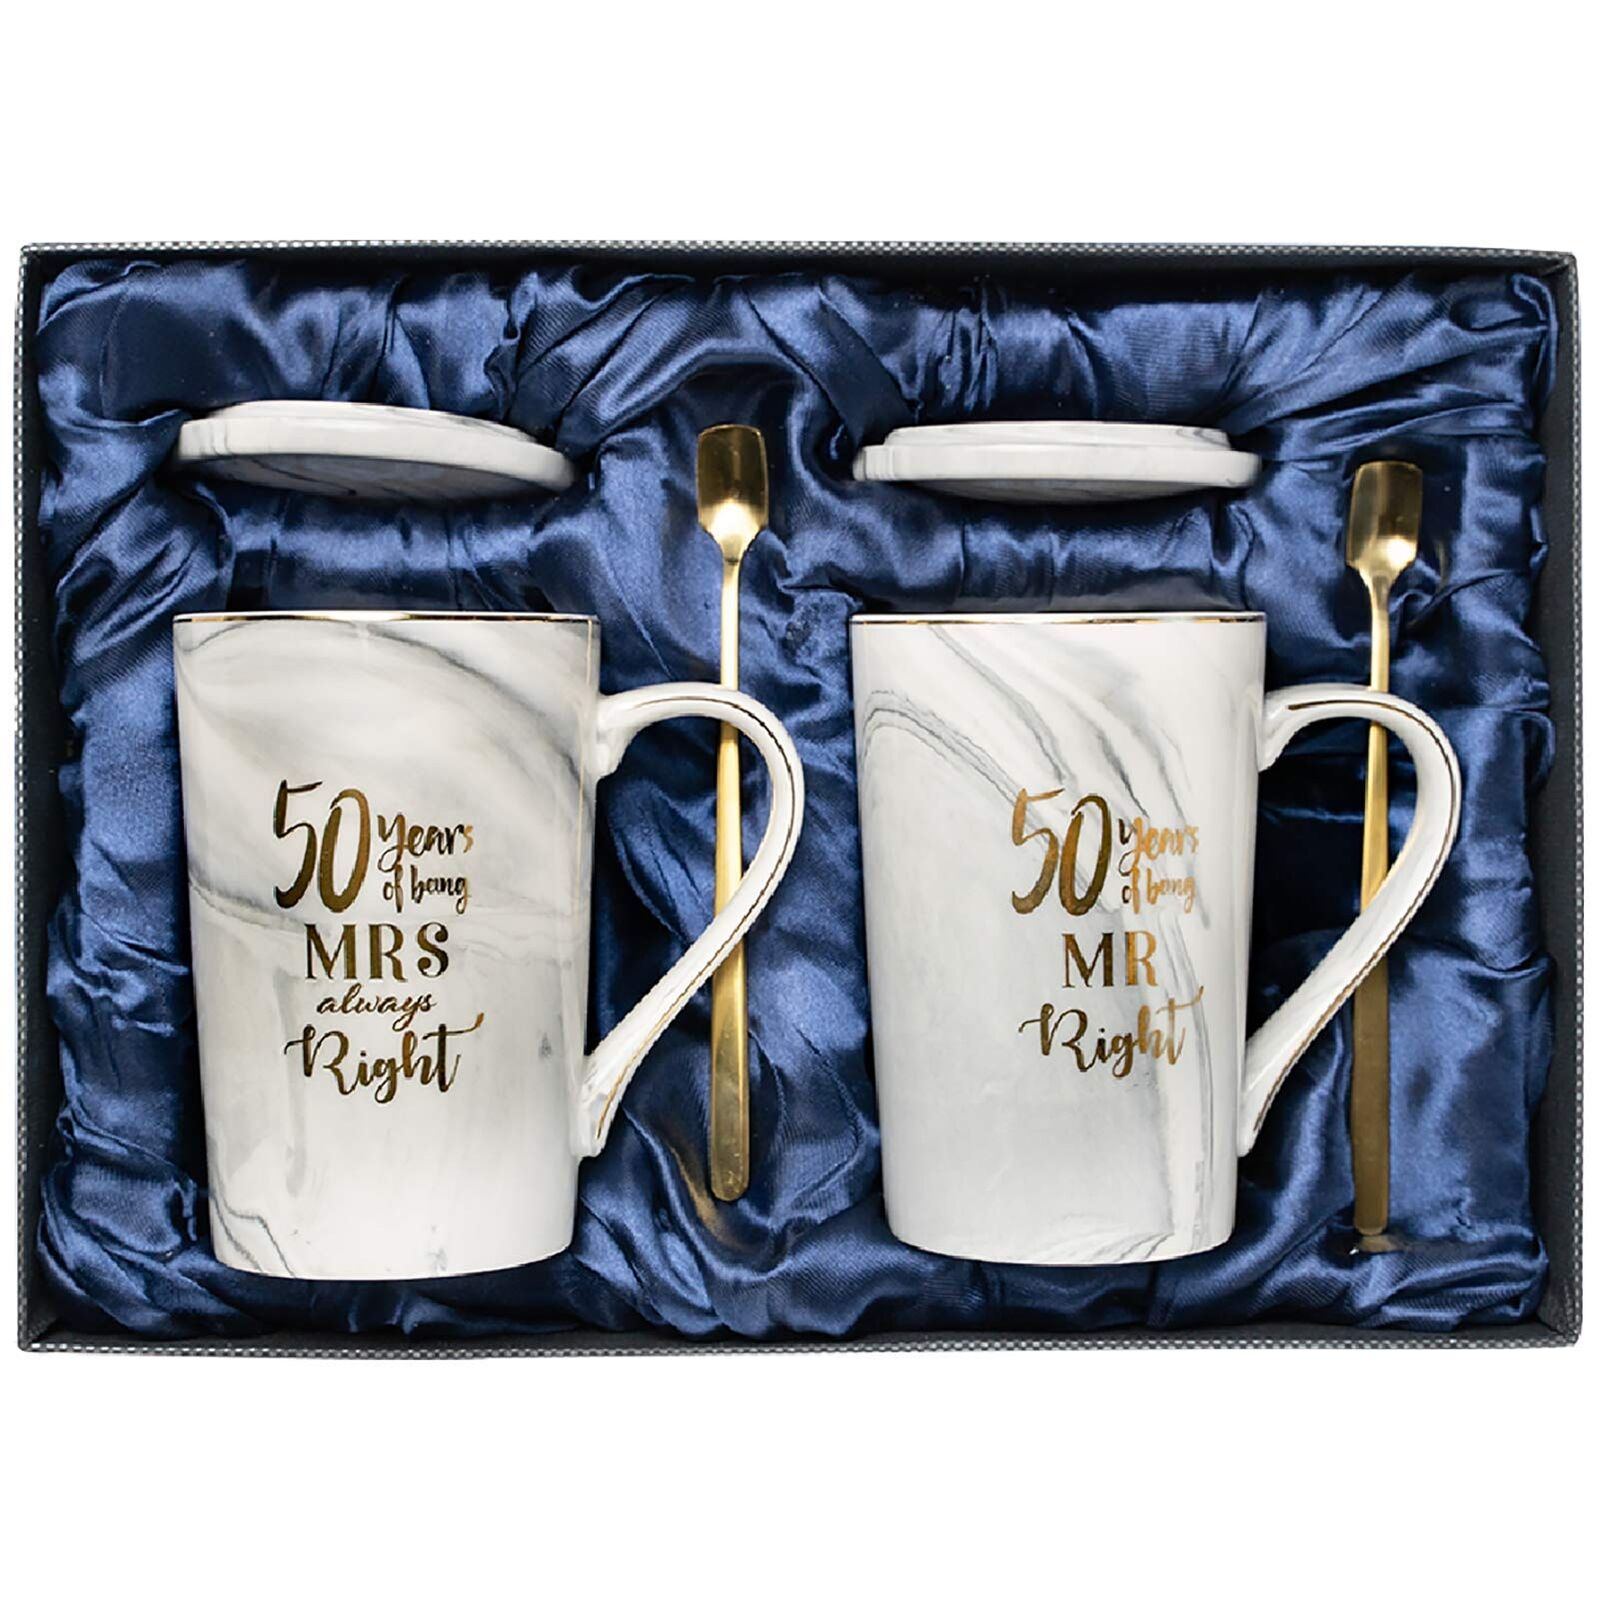 50th Anniversary Wedding Gifts Wedding Gifts Anniversary for Couple Couple Gi...